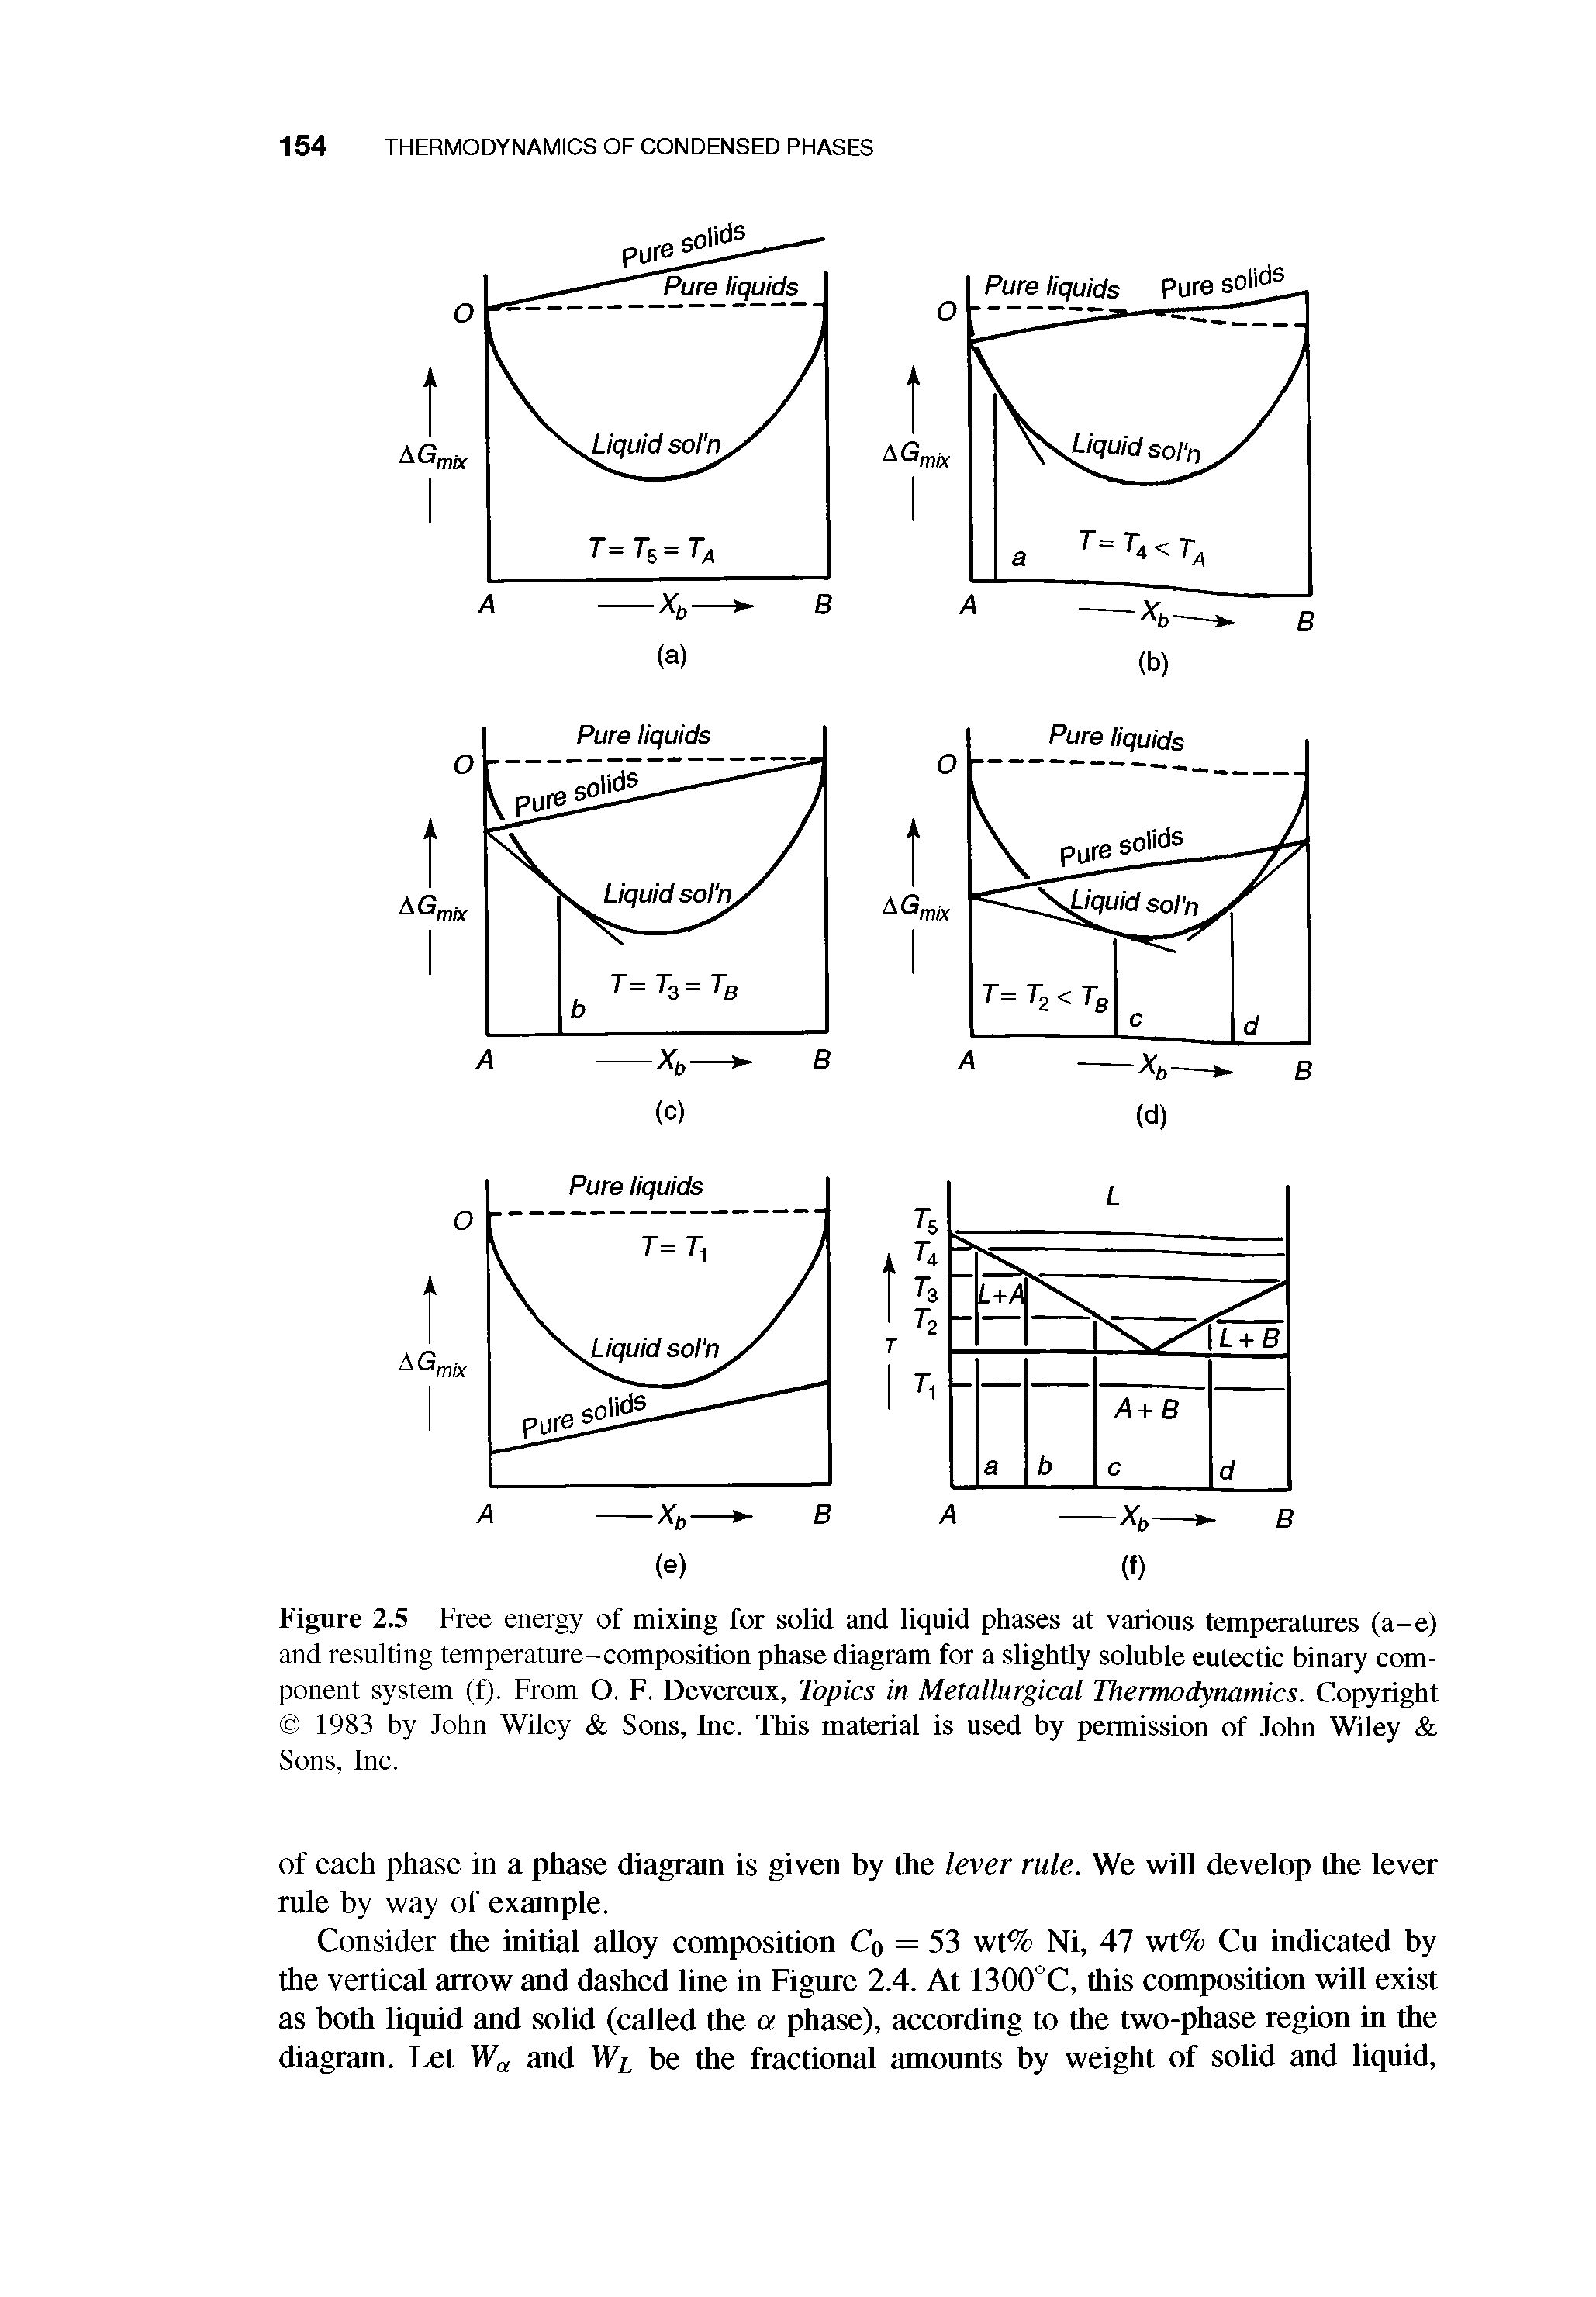 Figure 2.5 Free energy of mixing for solid and liquid phases at various temperatures (a-e) and resulting temperature-composition phase diagram for a slightly soluble eutectic binary component system (f). From O. F. Devereux, Topics in Metallurgical Thermodynamics. Copyright 1983 by John Wiley Sons, Inc. This material is used by permission of John Wiley Sons, Inc.